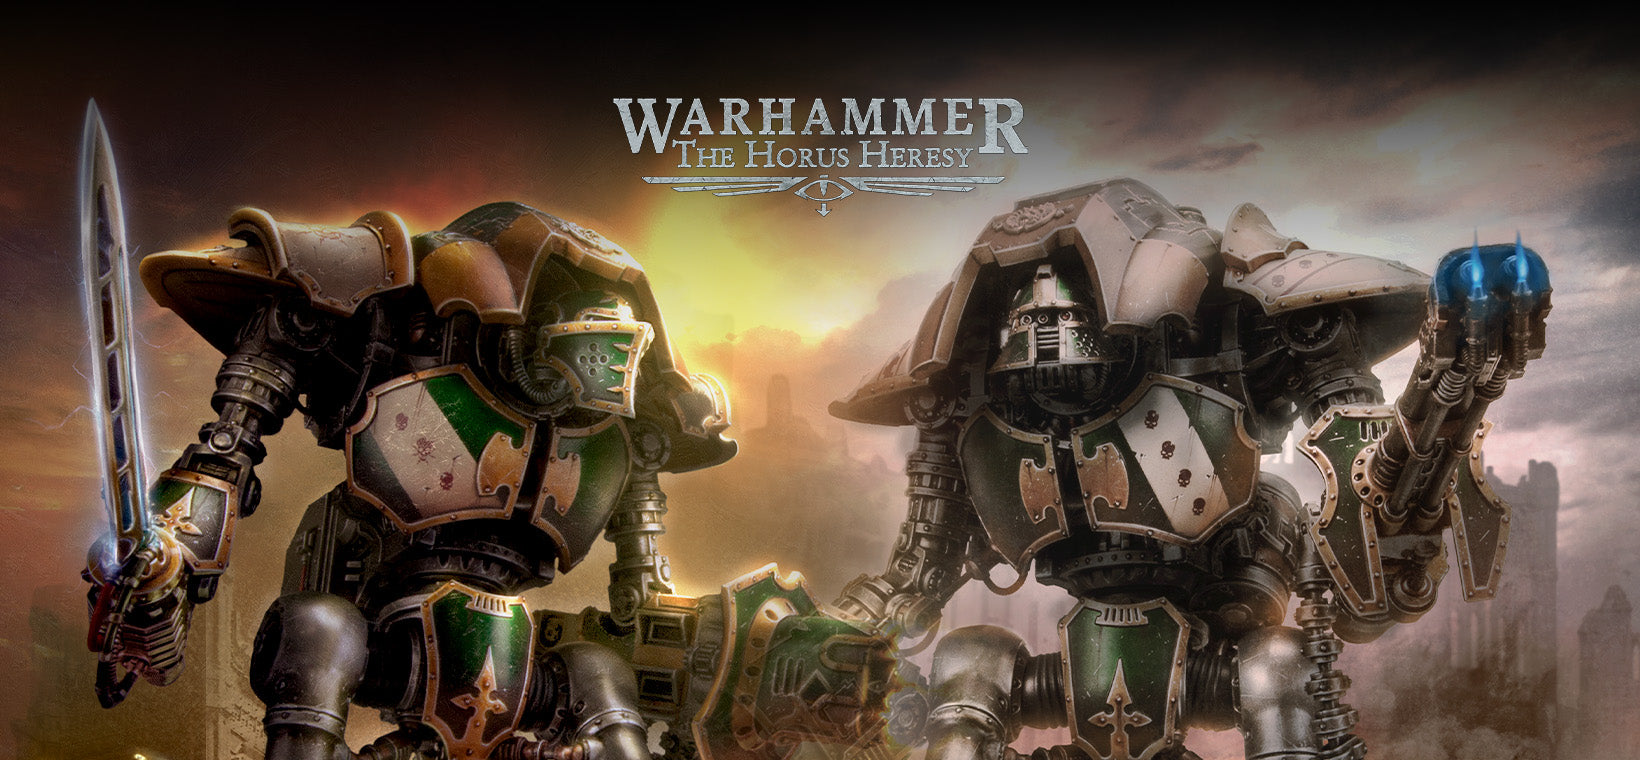 Warhammer The Horus Heresy - War in the Age of Darkness